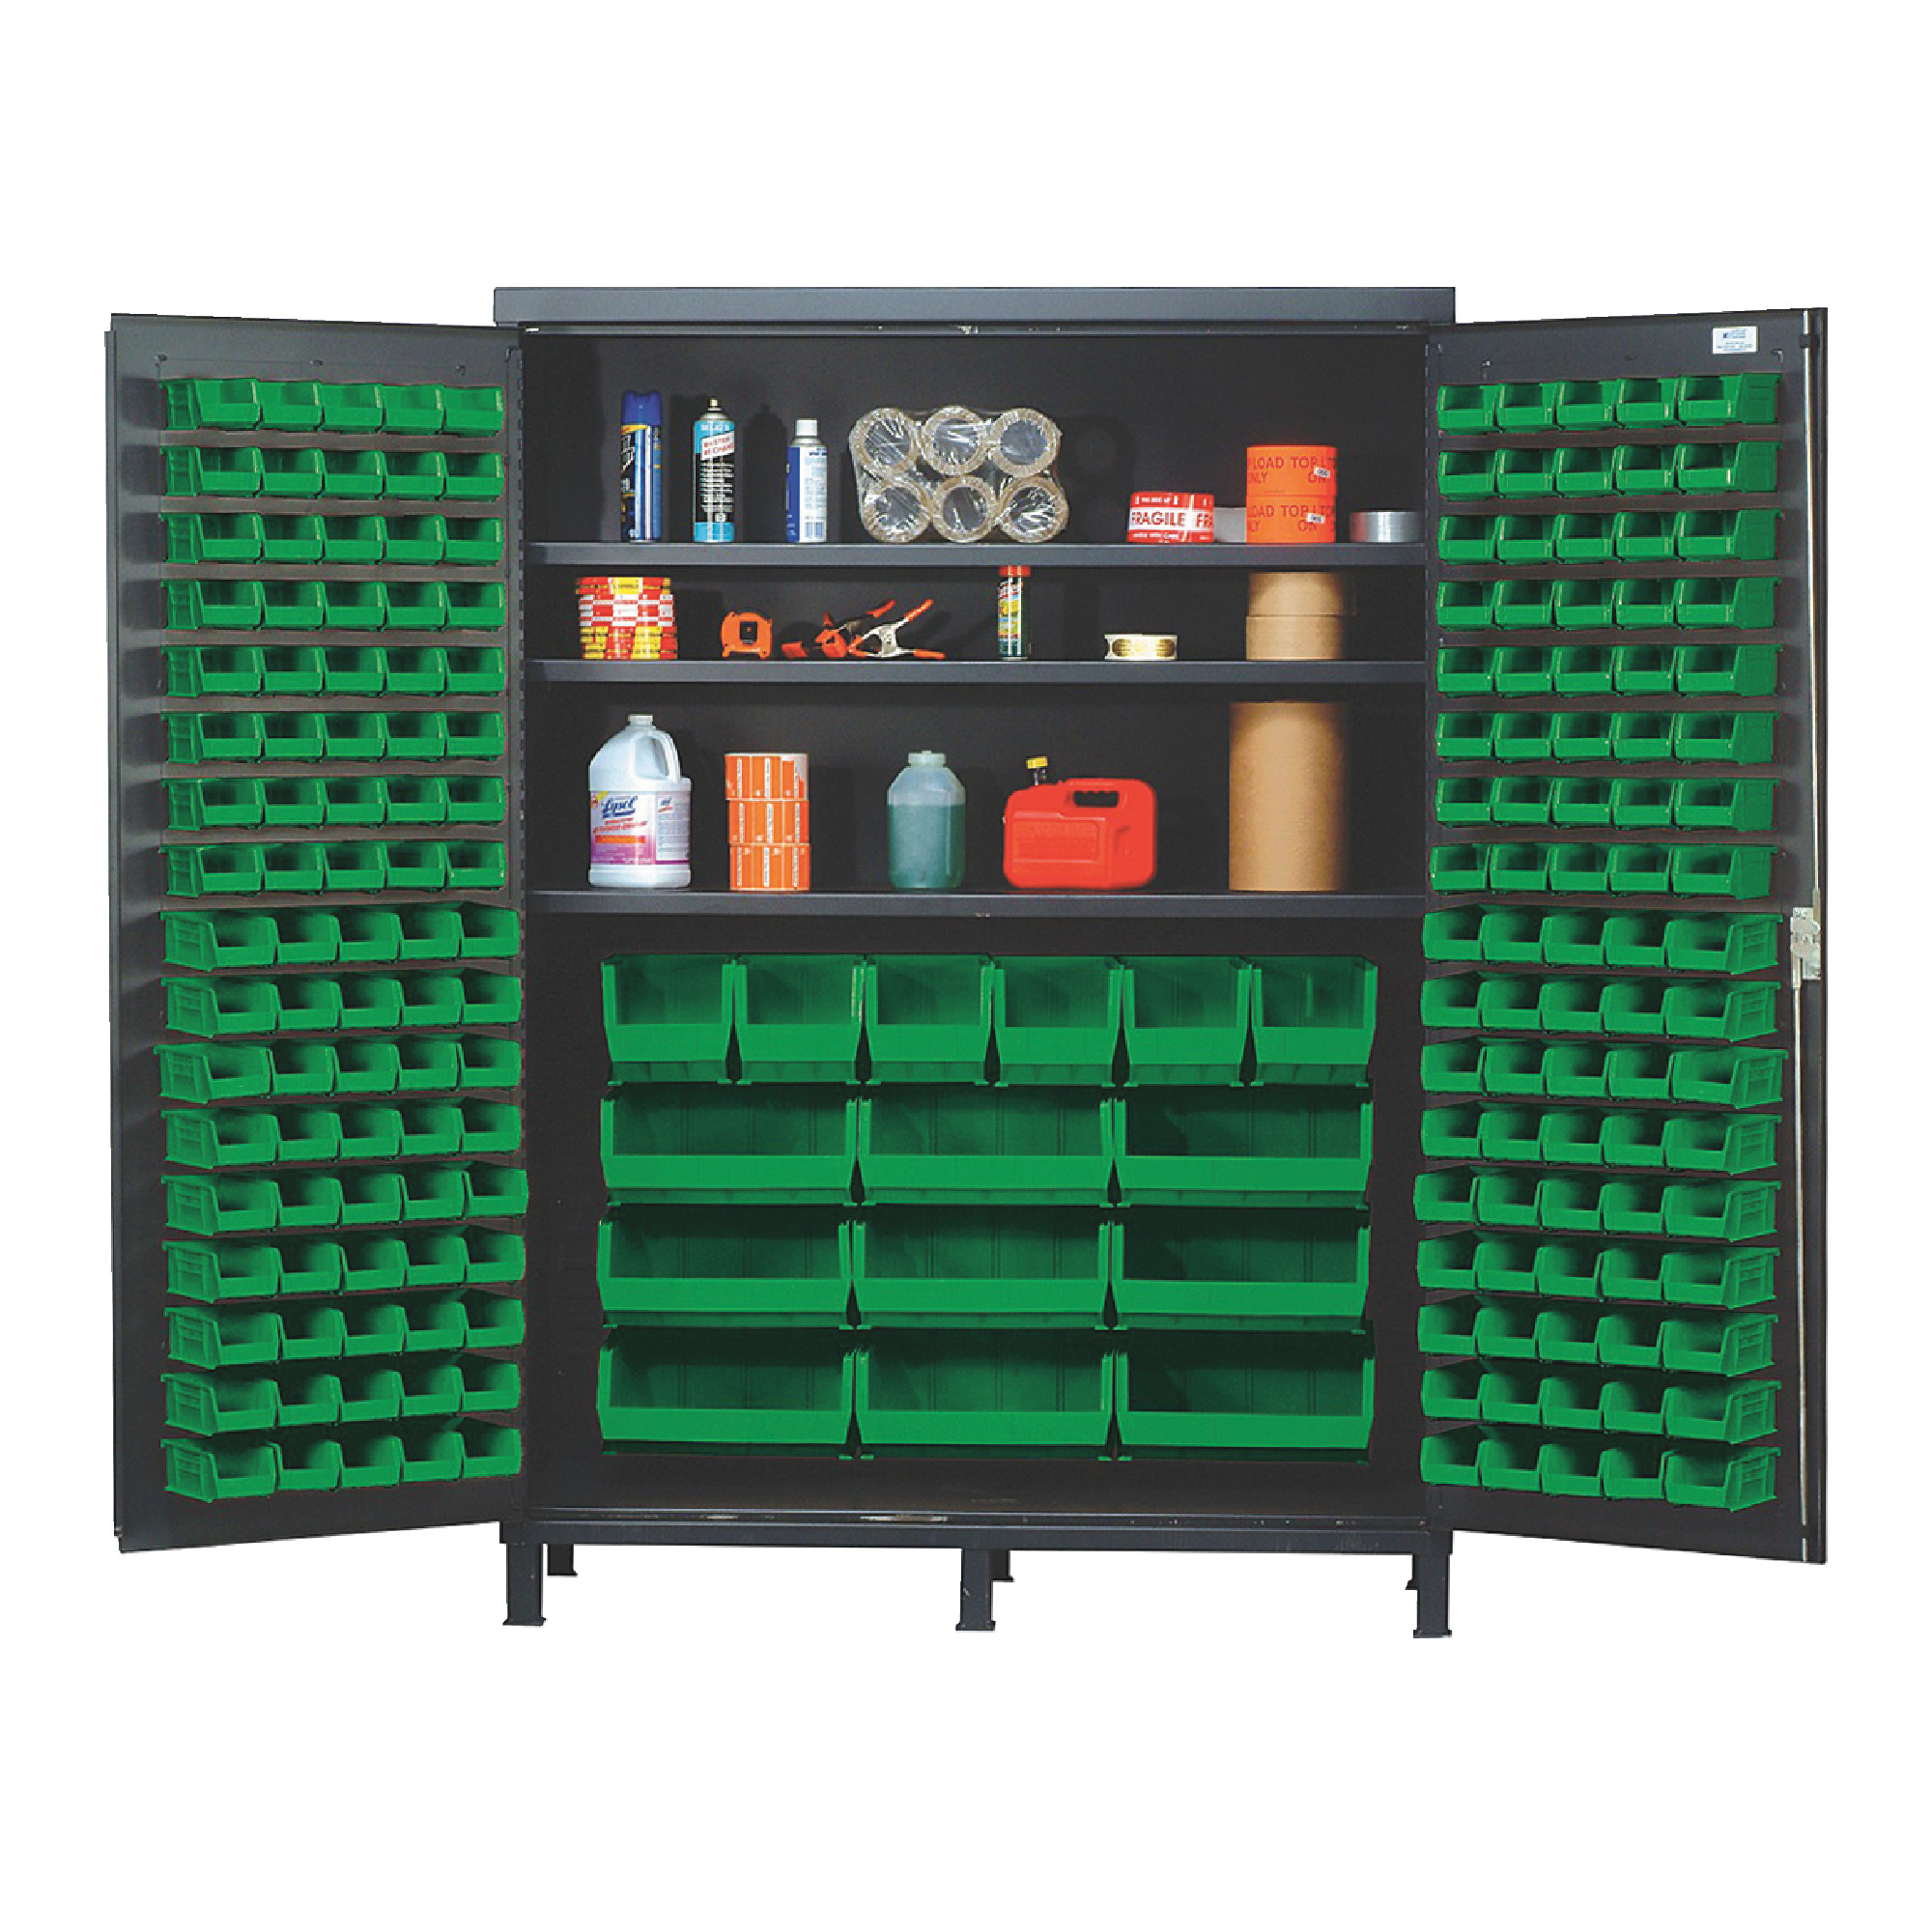 QUANTUM STORAGE SYSTEMS 60" Super Wide Colossal Heavy-Duty Floor Cabinet With 185 Green Bins